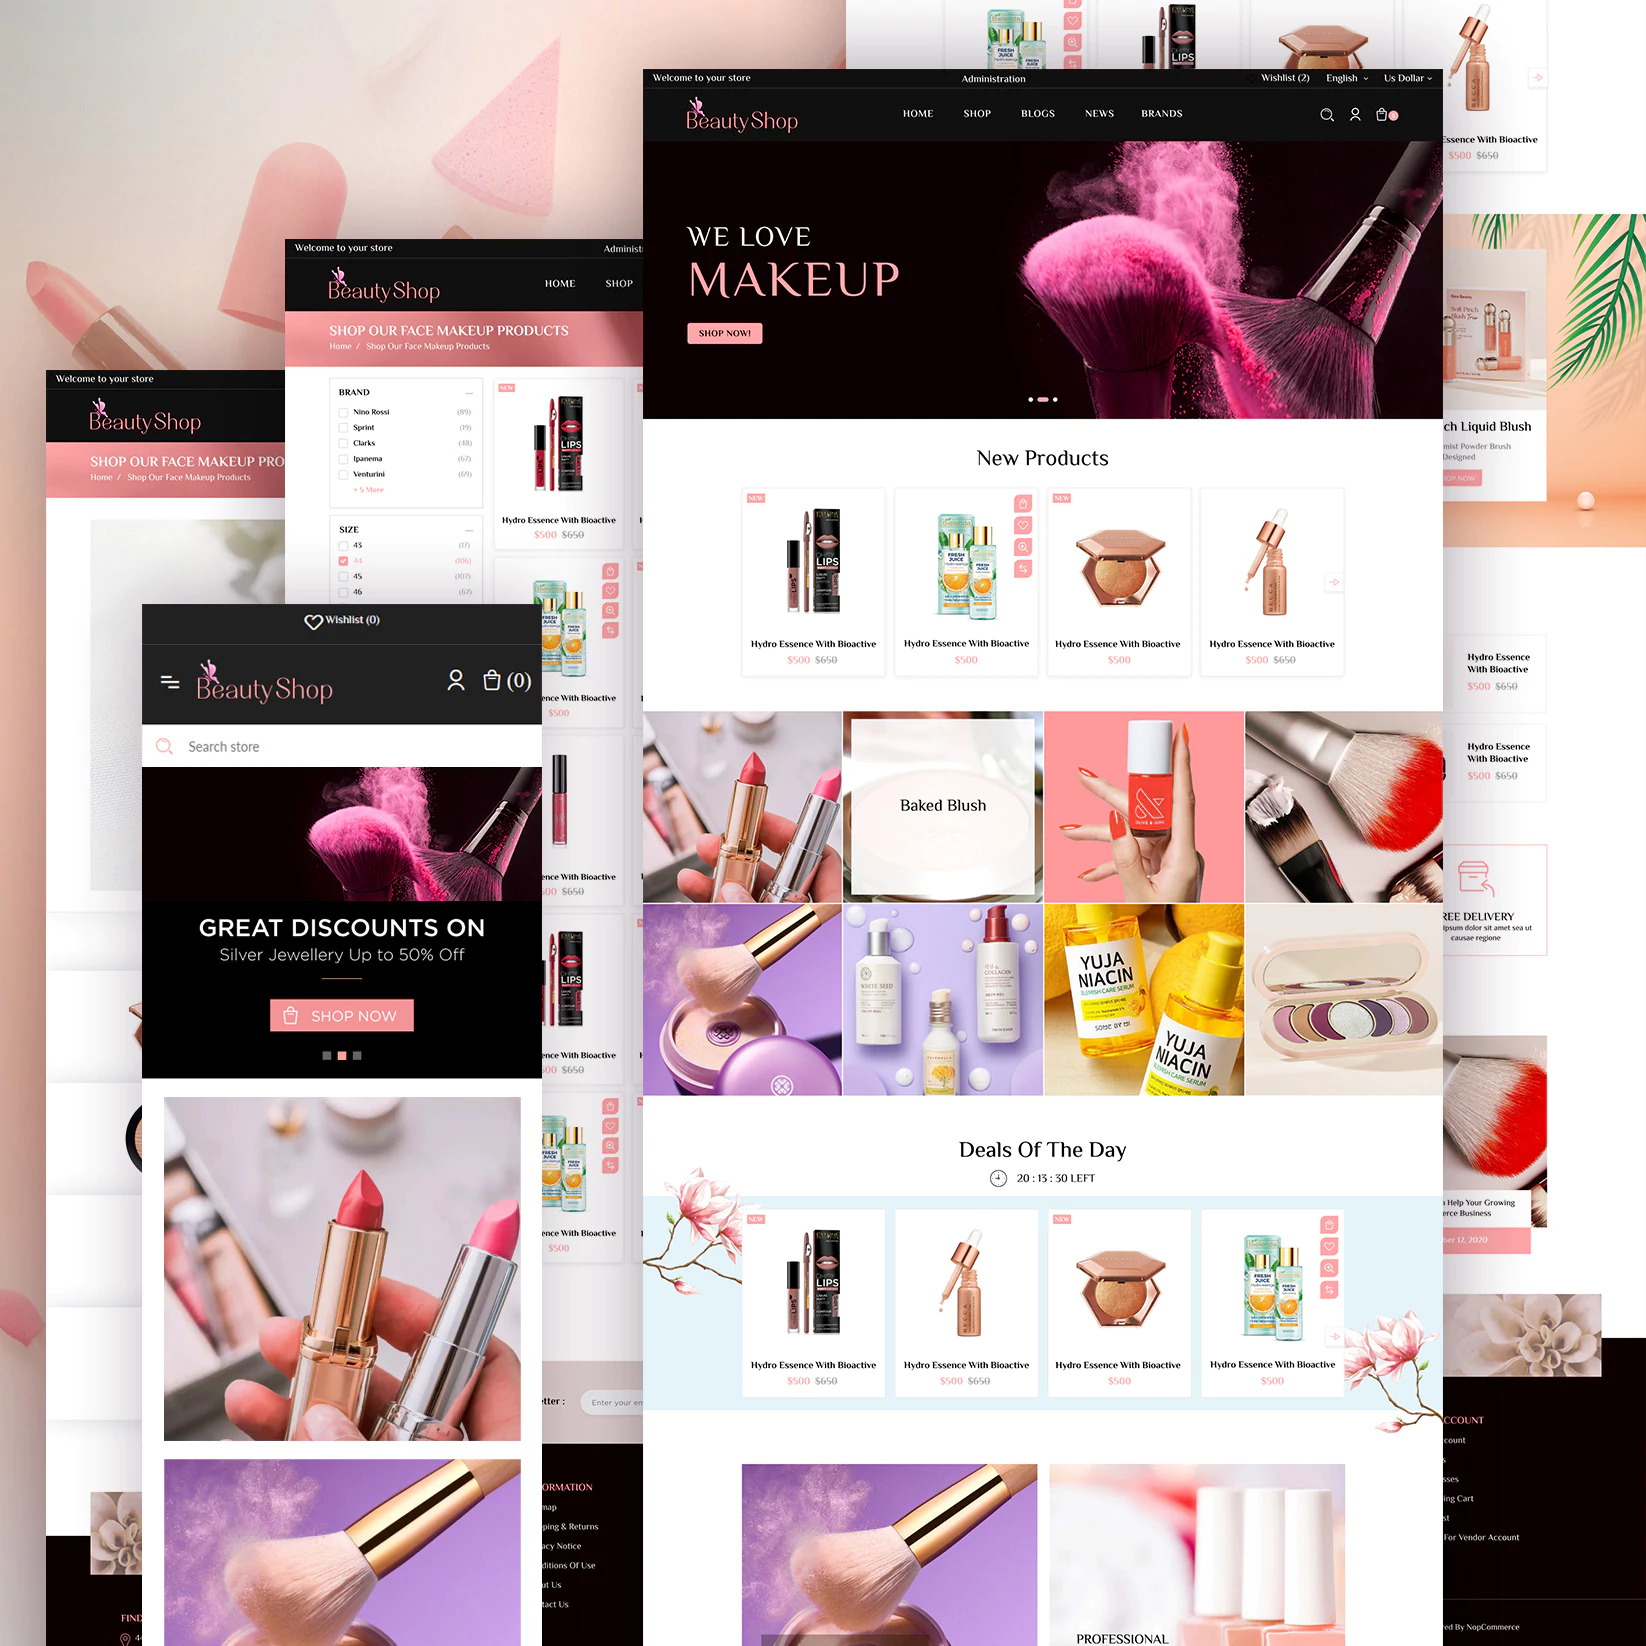 beautyShop theme all page